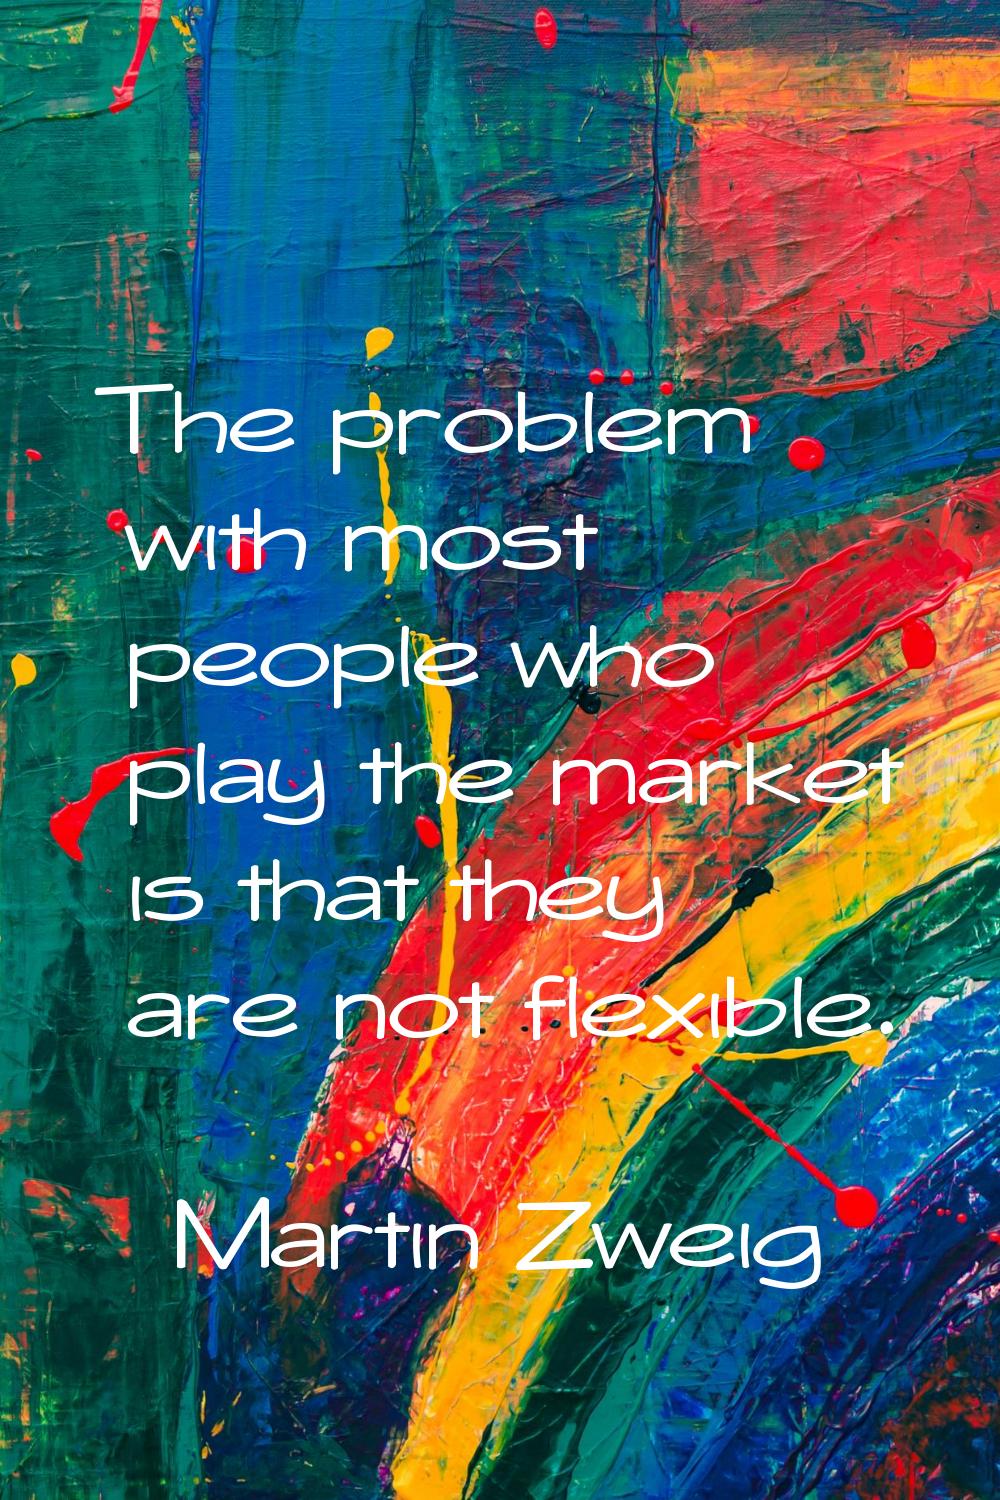 The problem with most people who play the market is that they are not flexible.